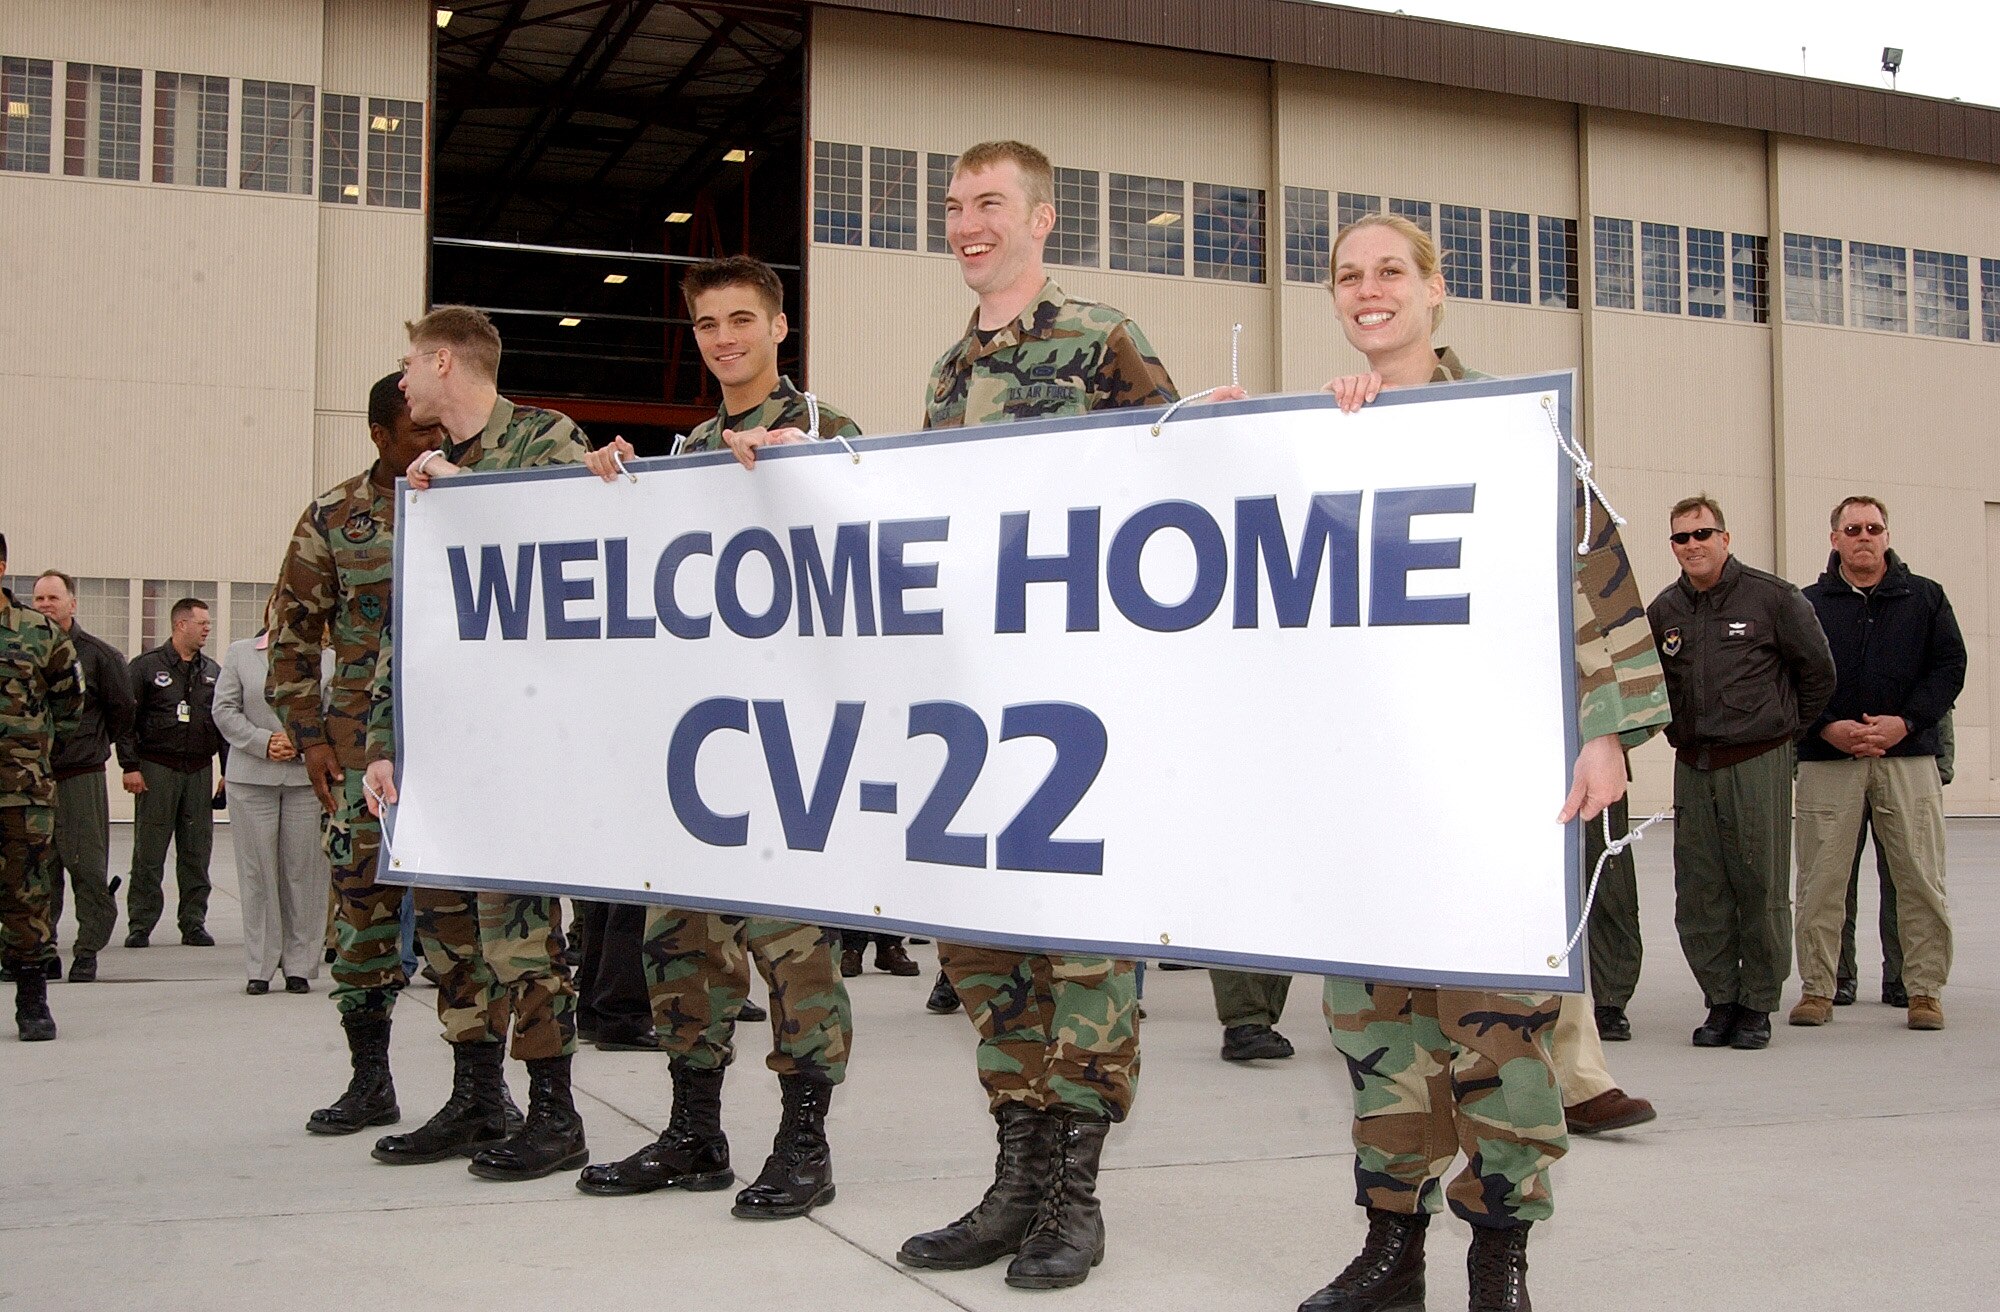 Airmen with the 58th Special Operations Wing hold a banner welcoming the Air Force's first operational CV-22 Osprey to Kirtland AFB, N.M., Monday, March 20, 2006.  The aircraft was flown to Kirtland by Lt. Gen. Michael W. Wooley, commander of Air Force Special Operations Command. (U.S. Air Force photo/Staff Sgt. Markus Maier)

